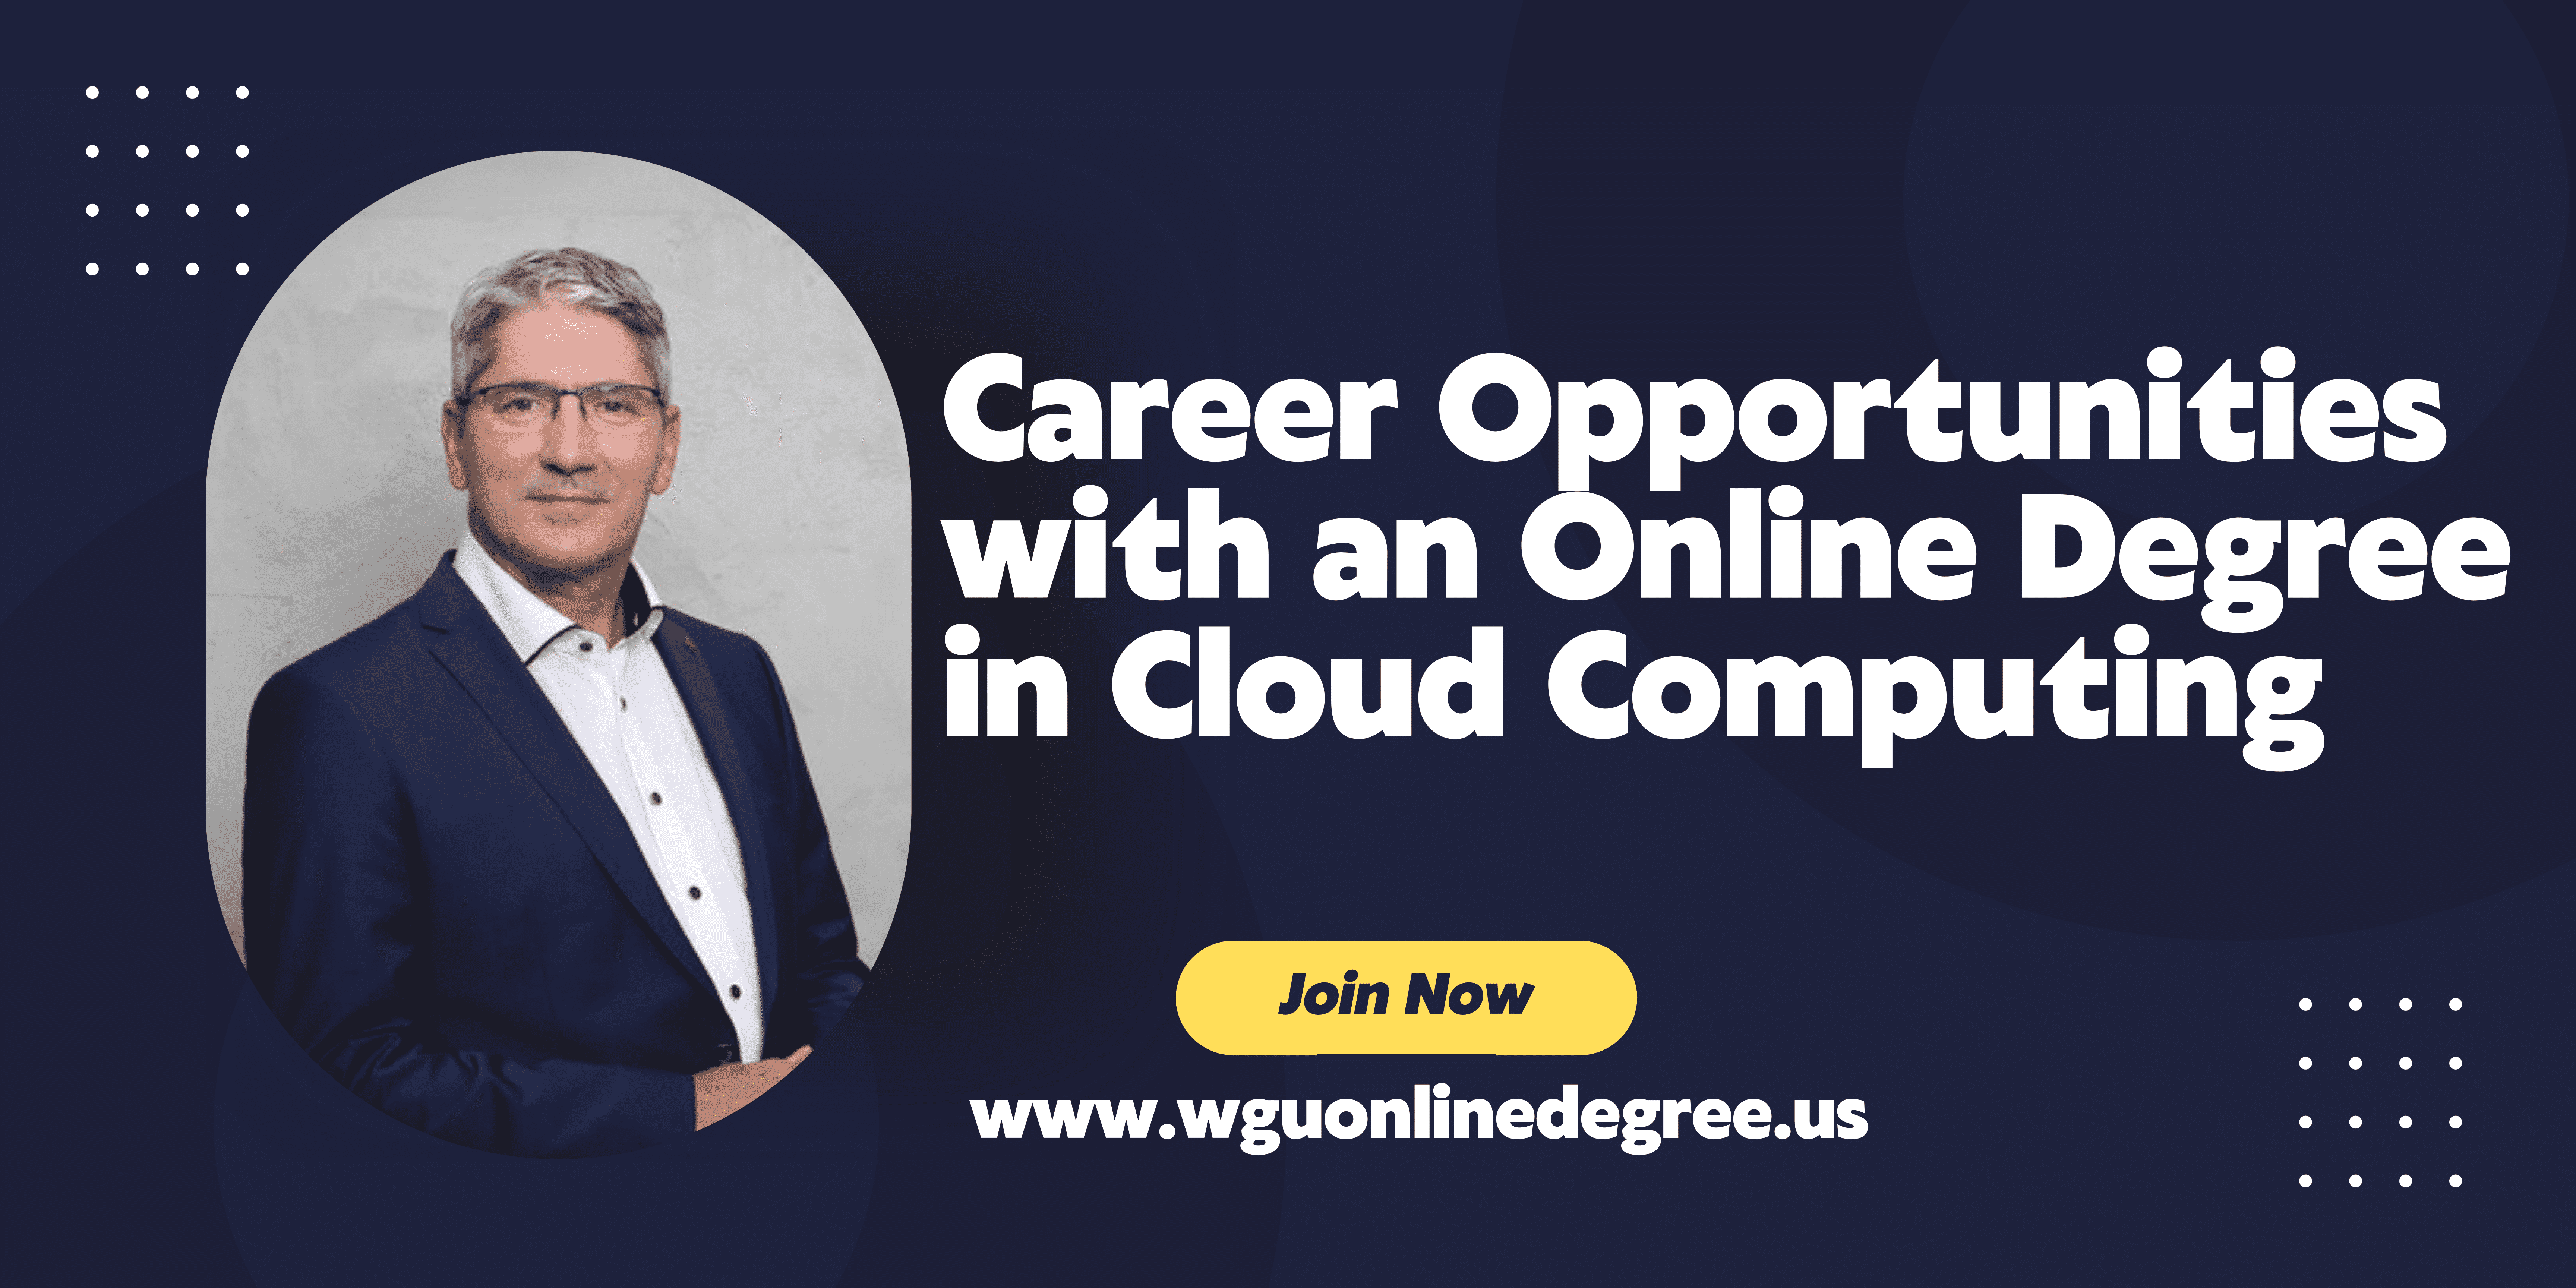 Career Opportunities with an Online Degree in Cloud Computing